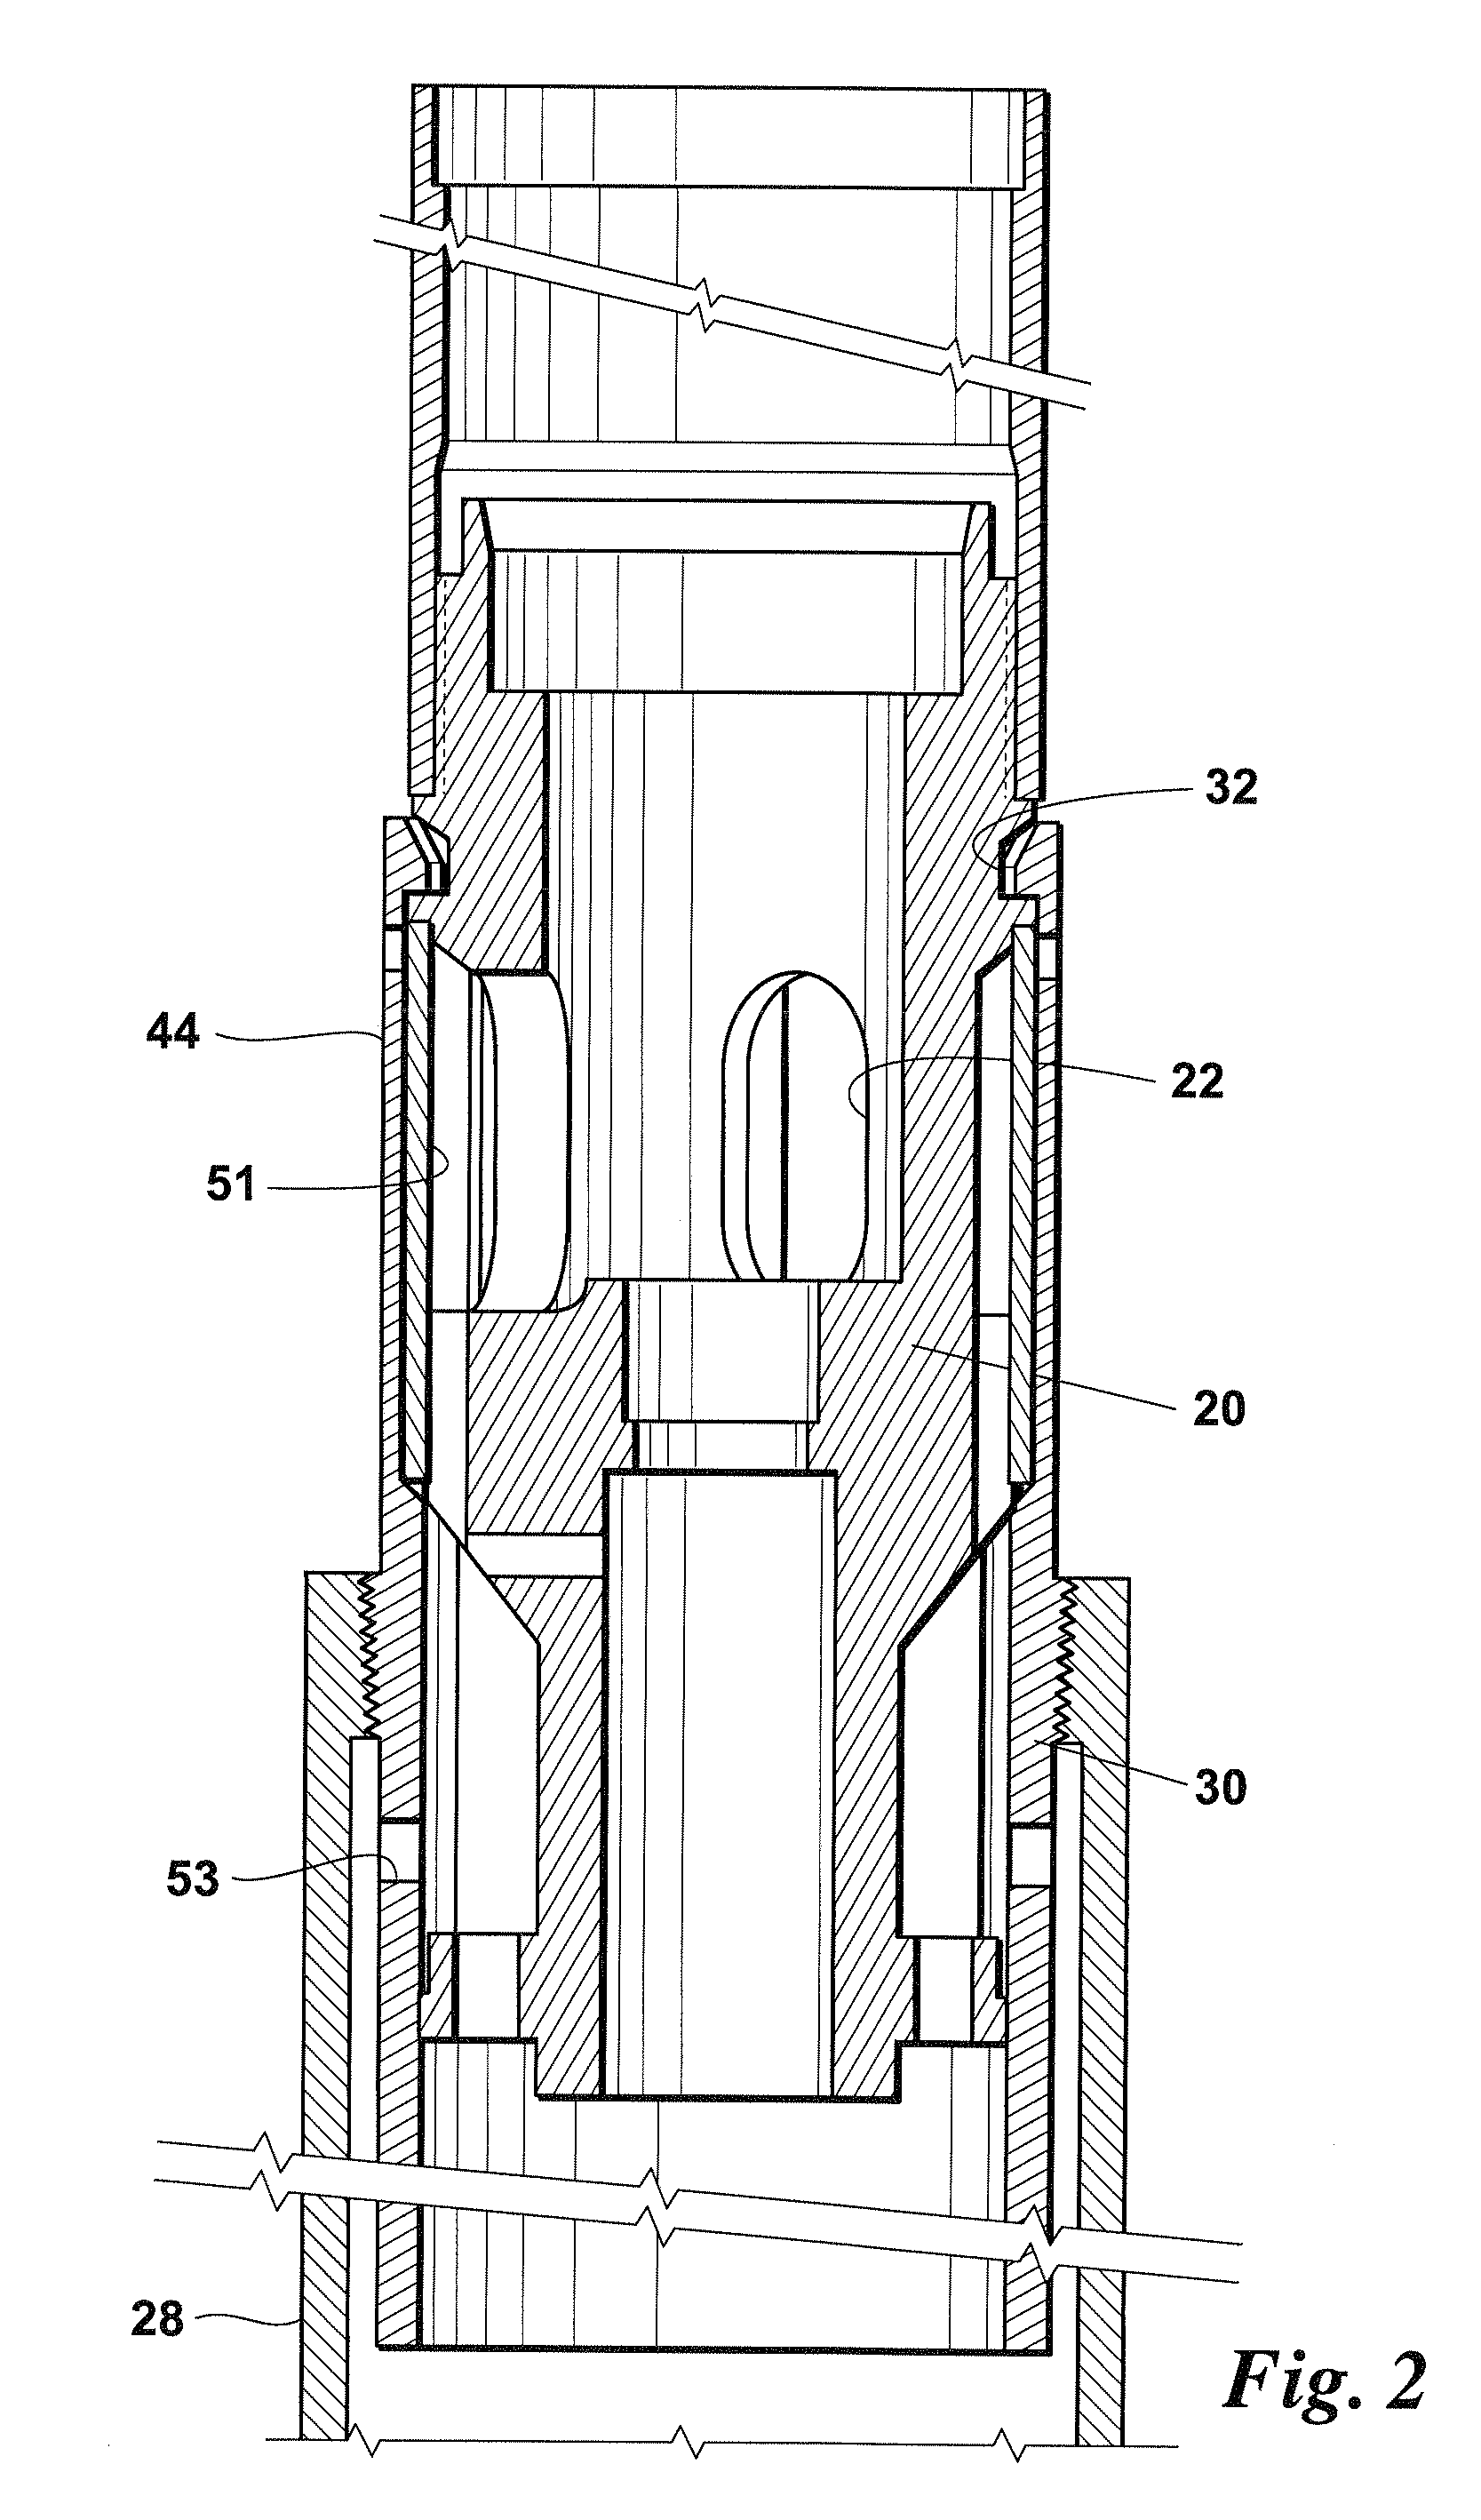 Collet adapter for a motor shroud